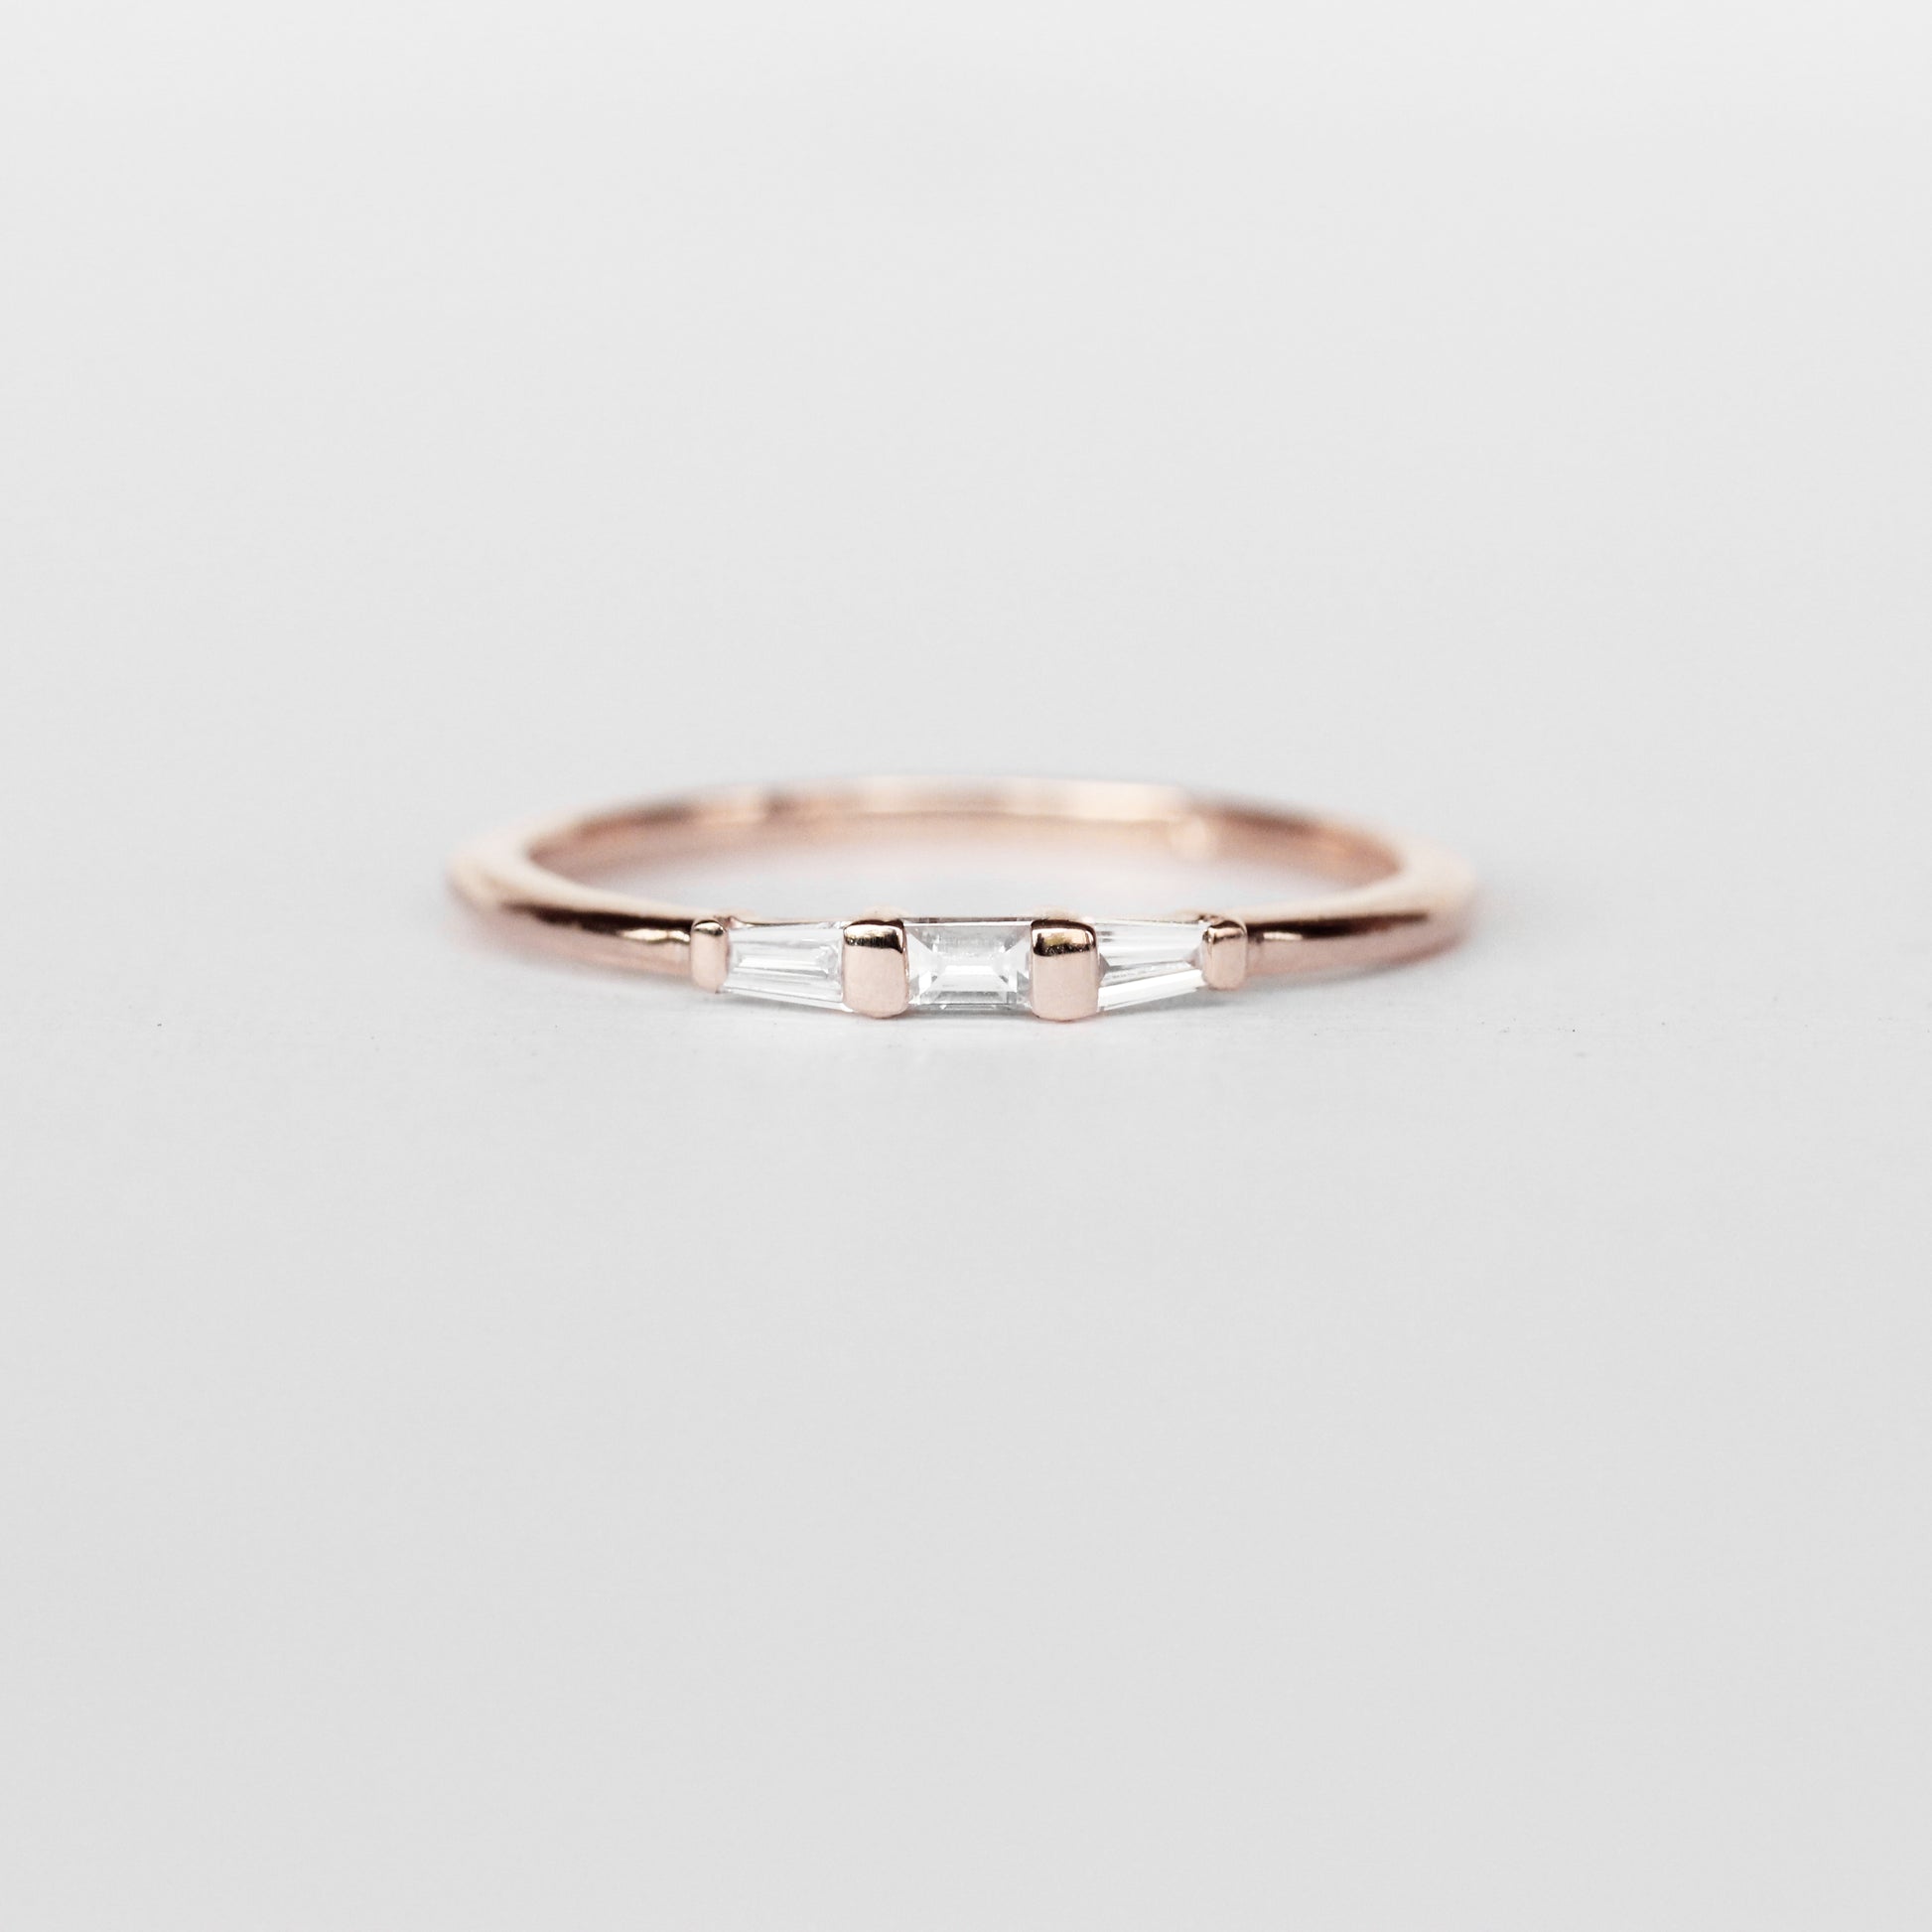 Woodsley Baguette Band Stackable Ring in Your Choice of 14k Gold - Midwinter Co. Alternative Bridal Rings and Modern Fine Jewelry